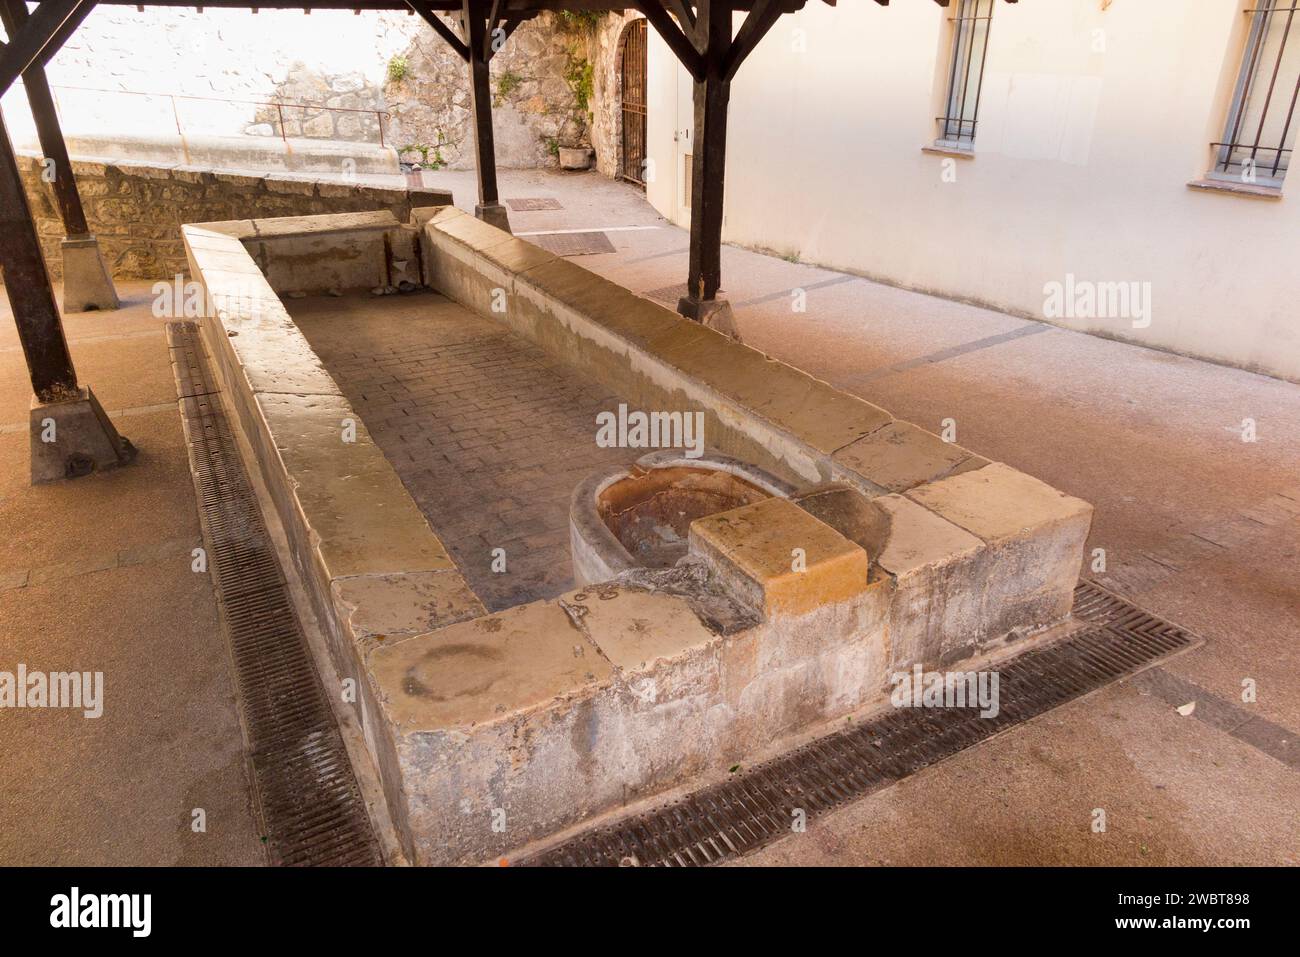 Communal public Lavoir, a stone sink trough to aid water hygiene. Old town Antibes, where people would have washed their laundry washing. France. (135) Stock Photo